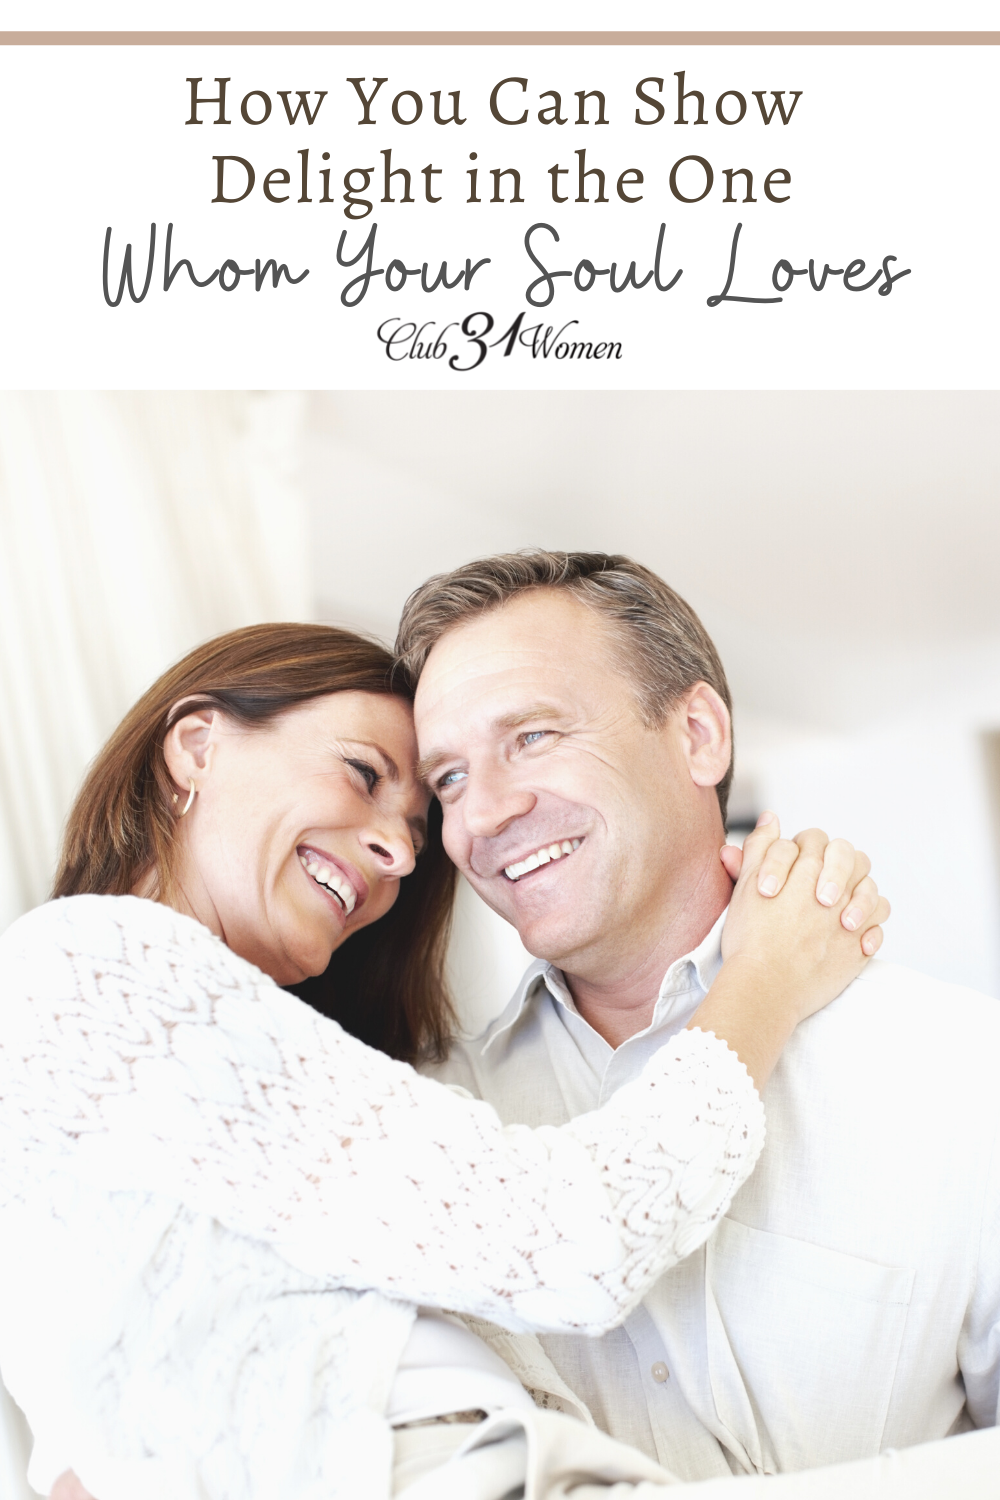 Showing delight for our husband can be done in so many ways. Let's not allow the everyday busyness of life rob us of that joy. via @Club31Women